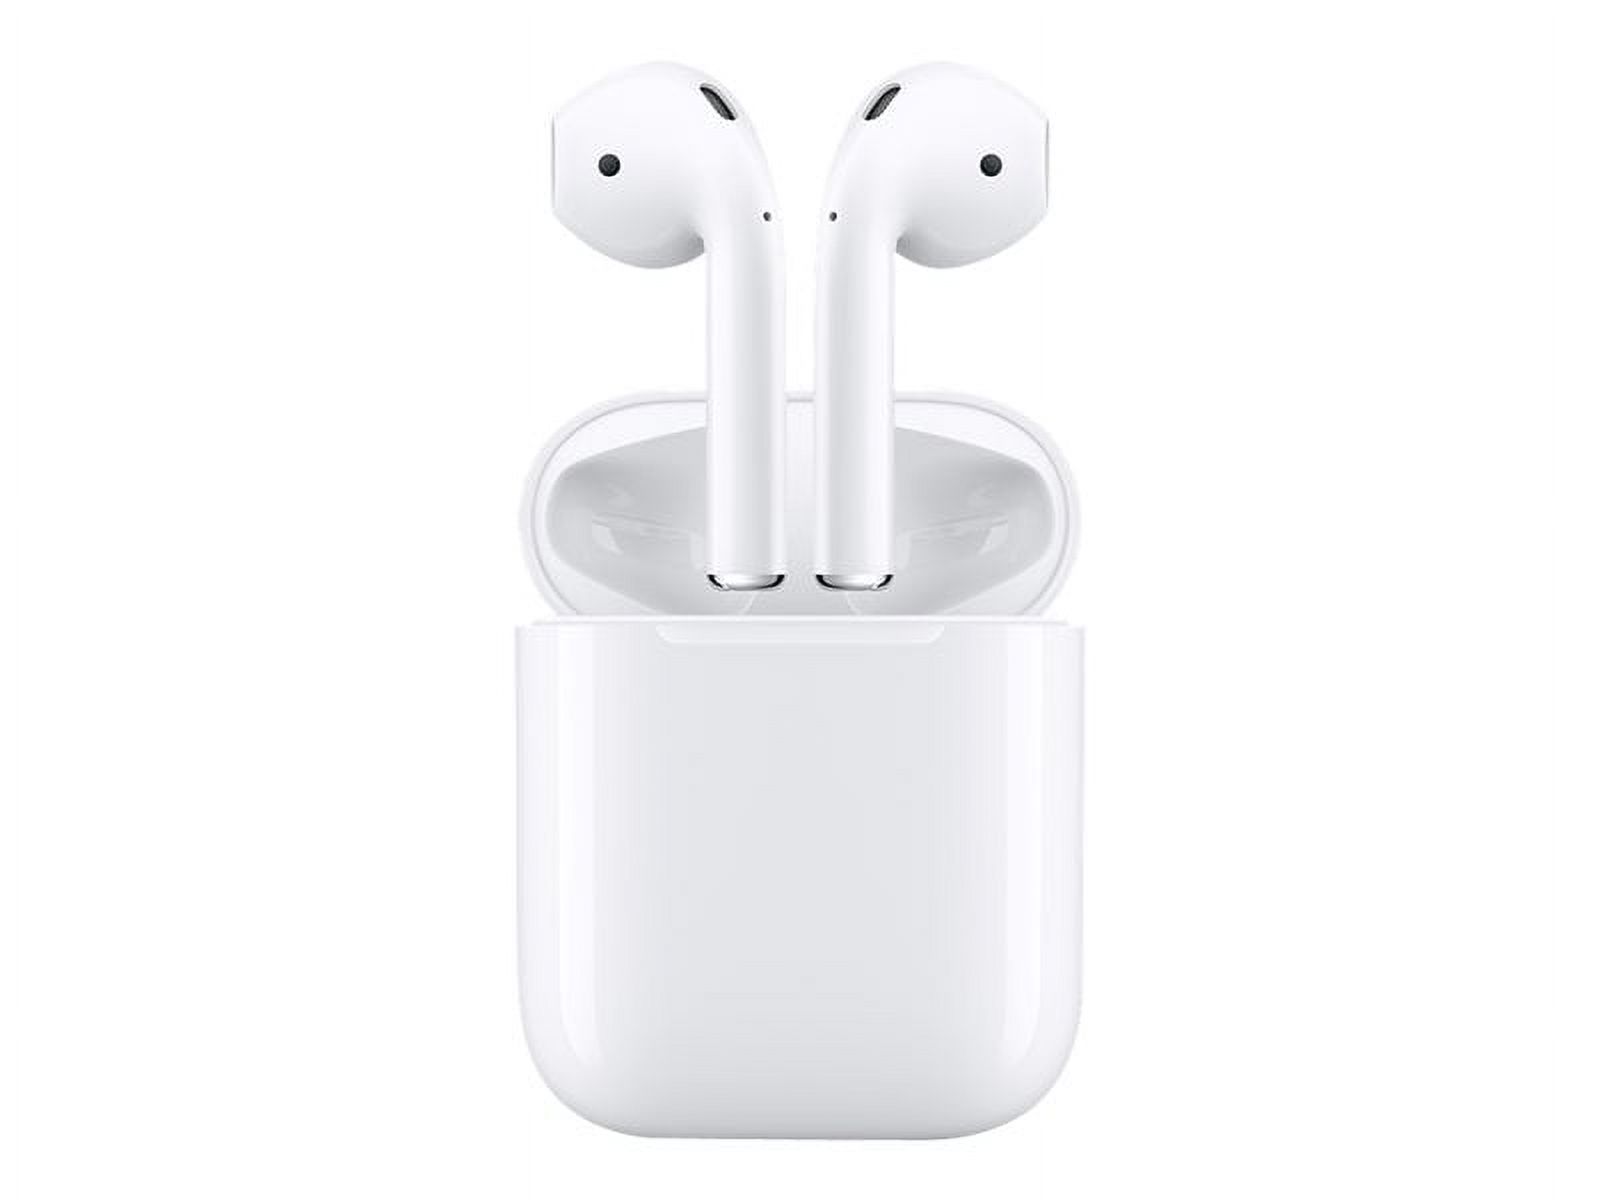 Restored Apple AirPods Bluetooth True Wireless Earbuds with Charging Case, White, VIPRB-MMEF2AM/A (Refurbished) - image 3 of 3